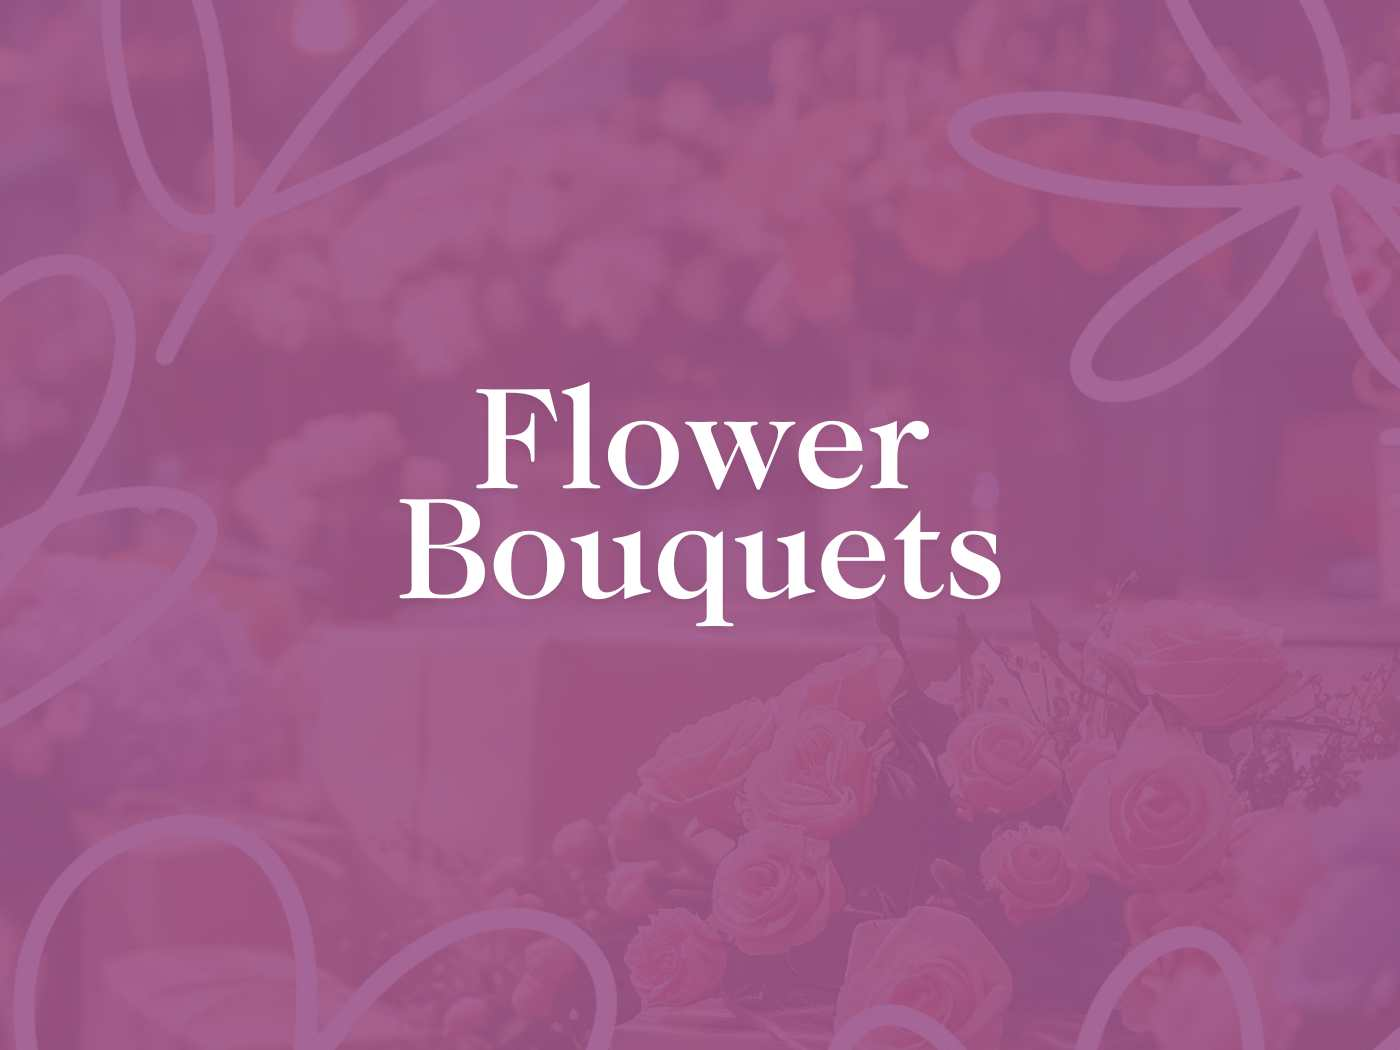 Exquisite Flower Bouquets Collection from Fabulous Flowers and Gifts, delivered with heart and soul. Same day delivery of the perfect gift of flowers for Mother's Day and every day.